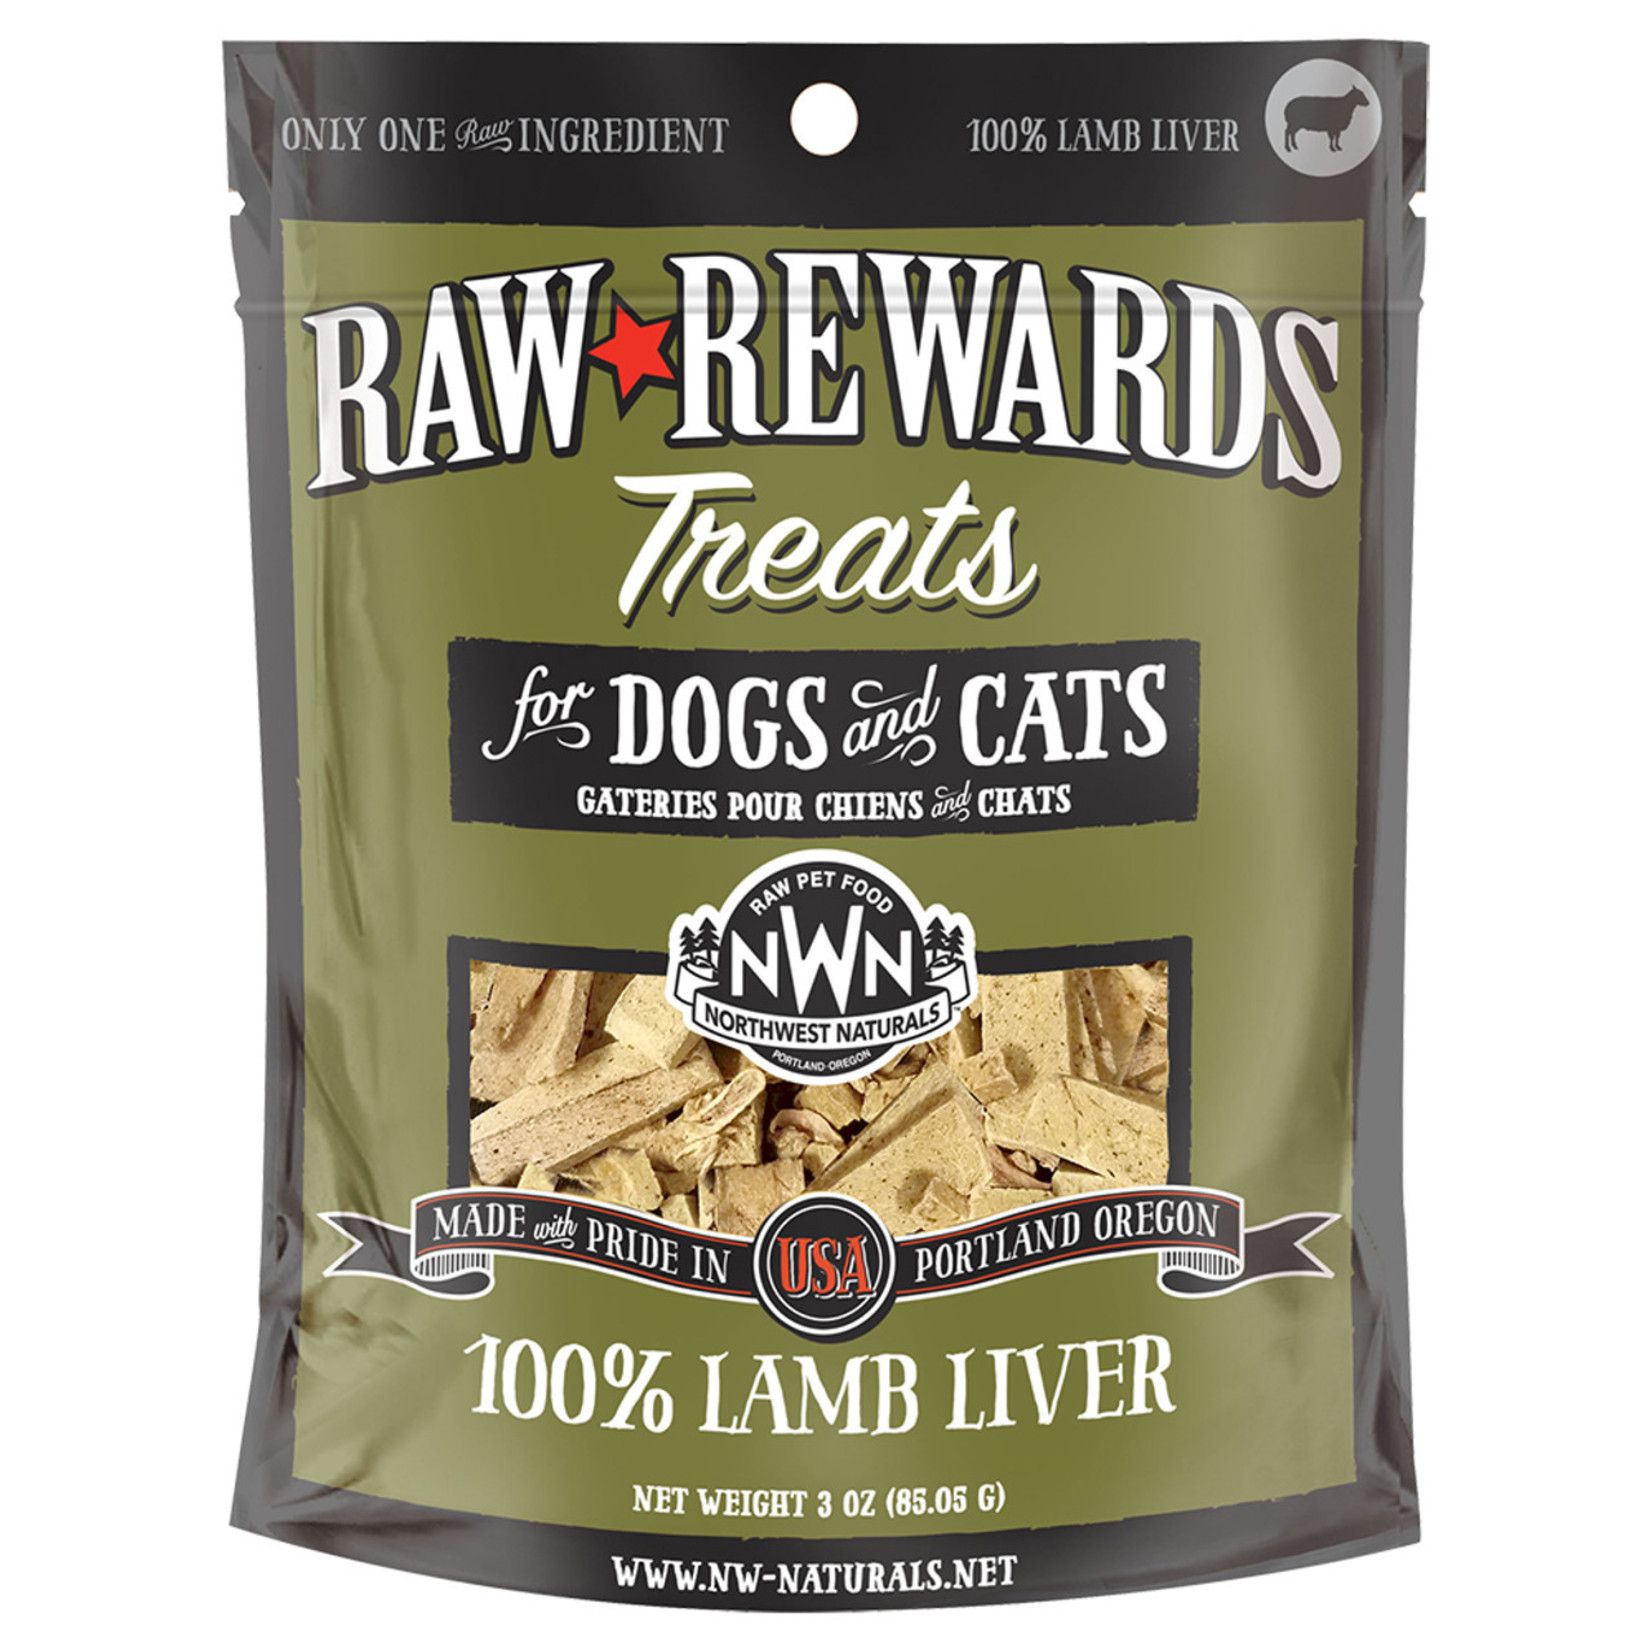 Northwest Naturals Raw Rewards Treats Freeze Dried Lamb Liver for Dogs & Cats